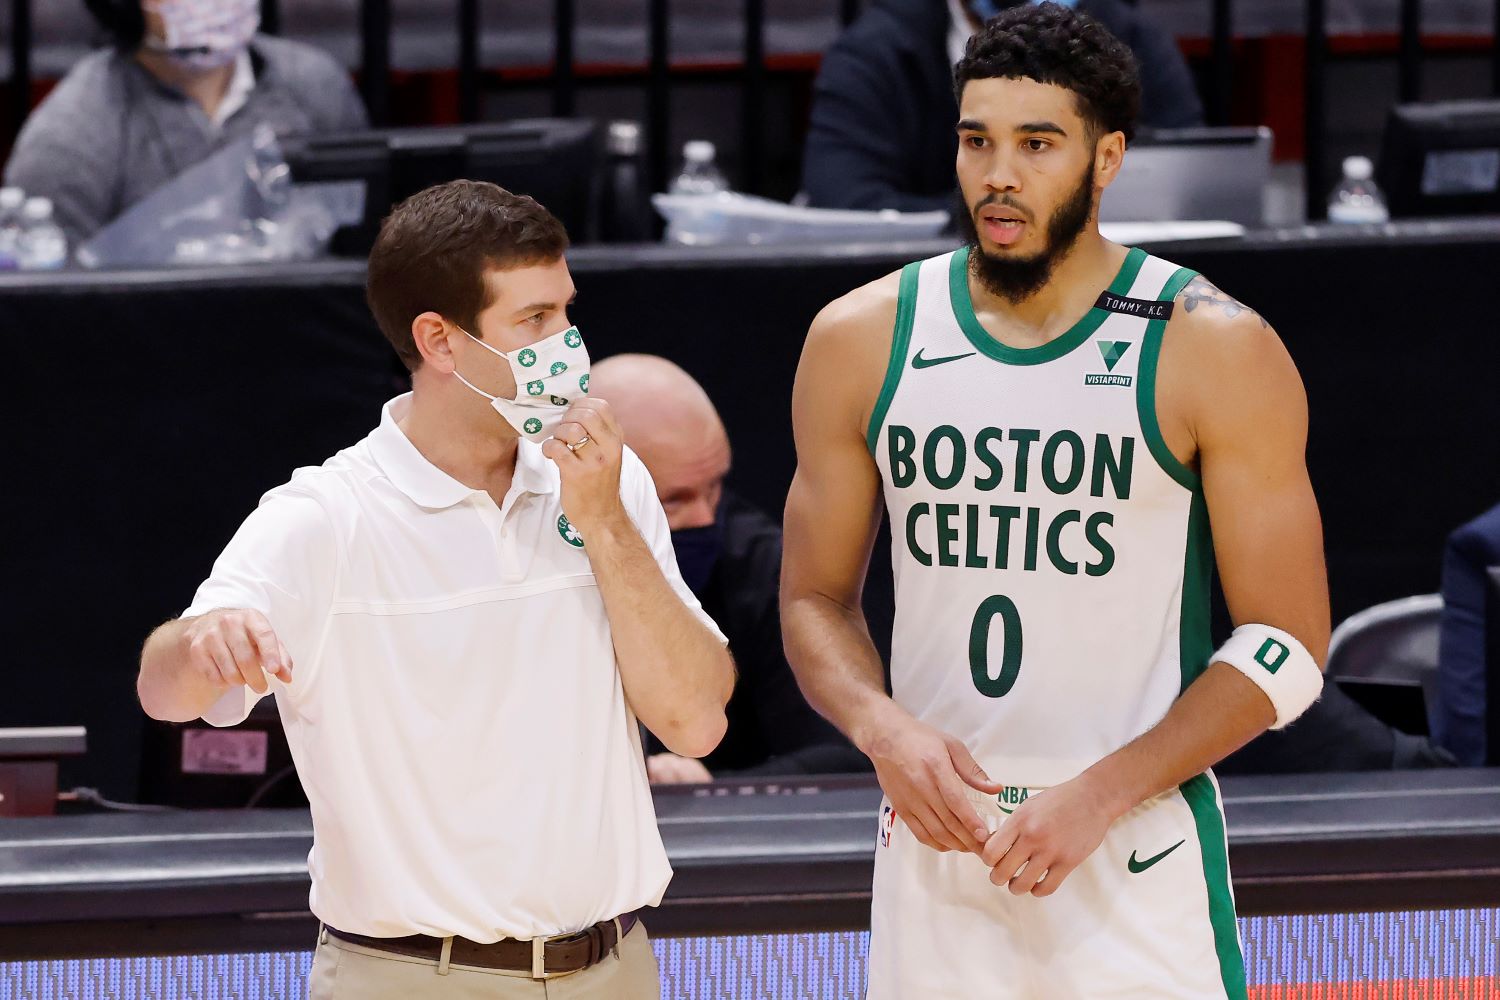 Jayson Tatum will not be playing for the Boston Celtics anytime soon due to the NBA's COVID-19 protocols.